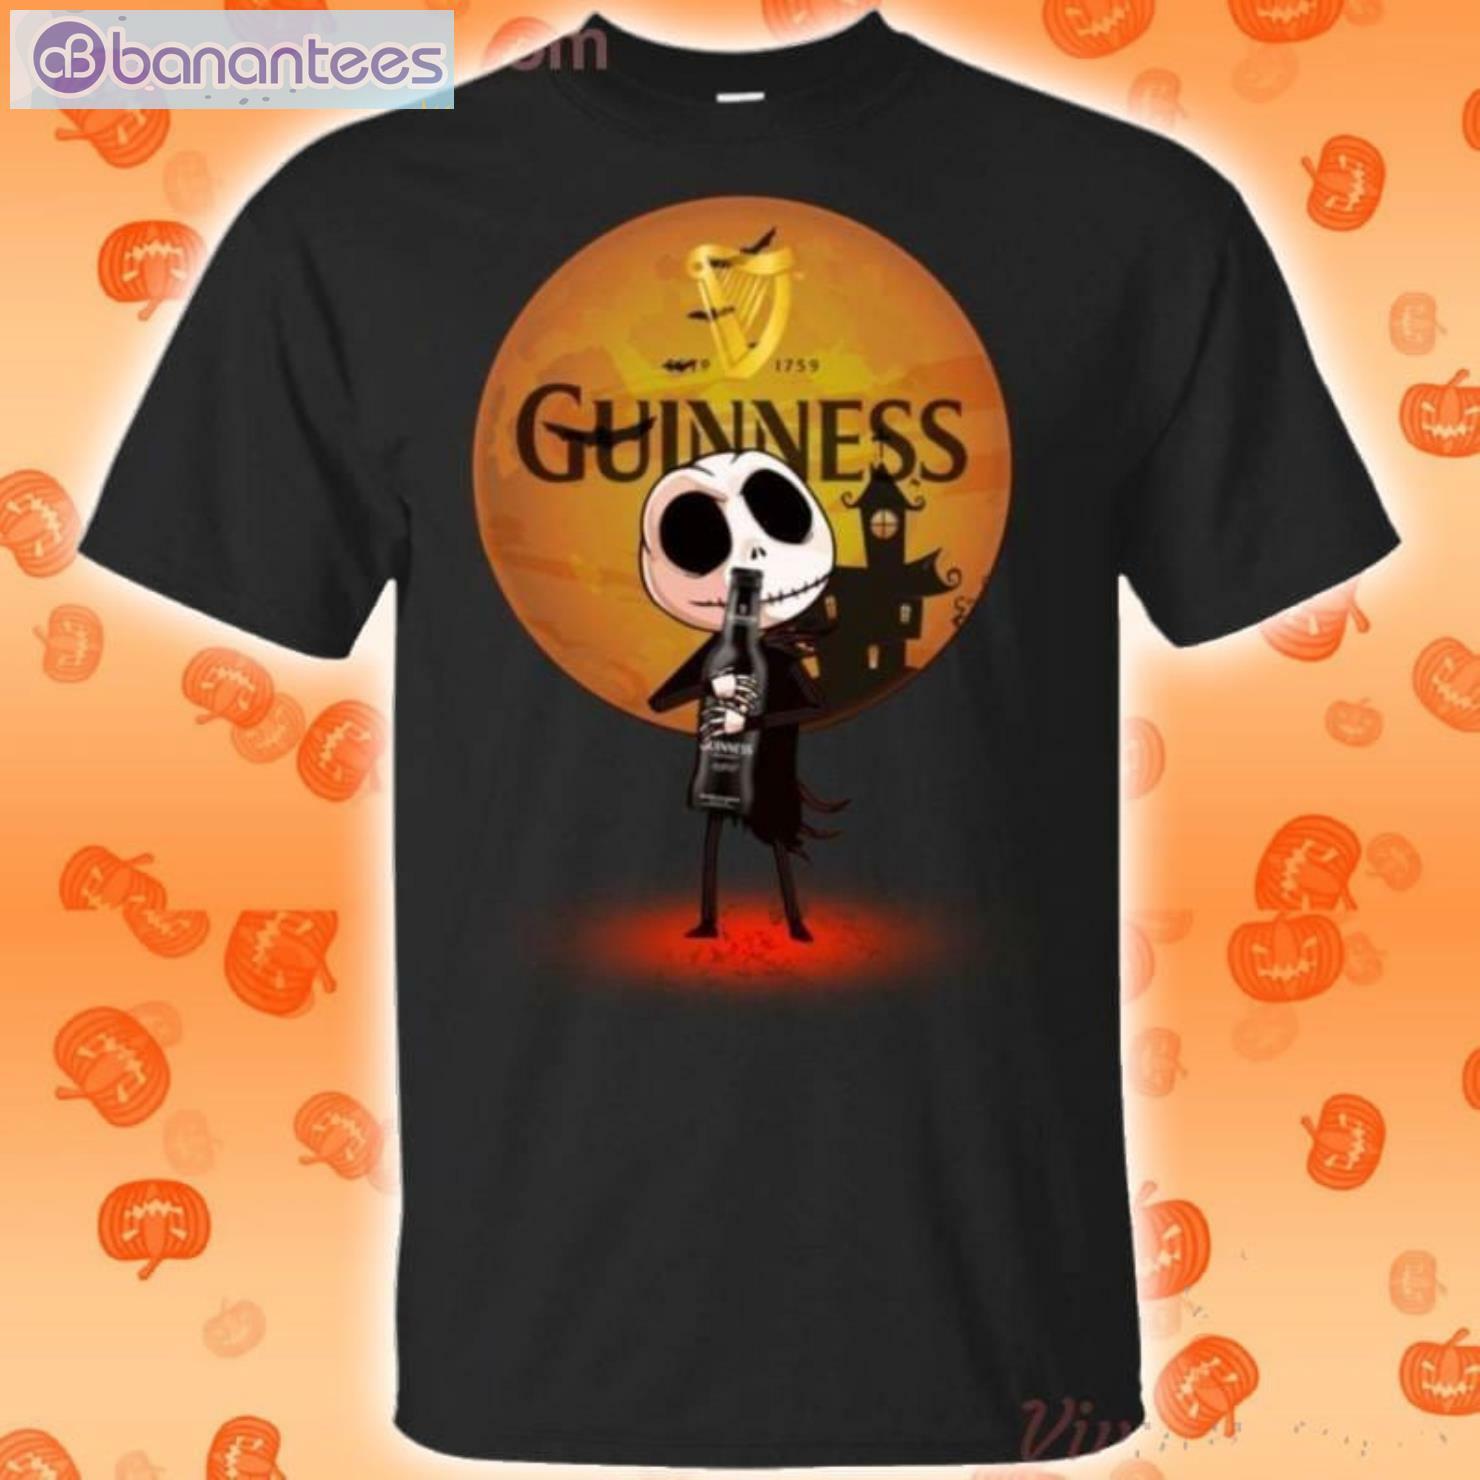 Jack Skellington Hold Guinness Beer Halloween T-Shirt Product Photo 1 Product photo 1